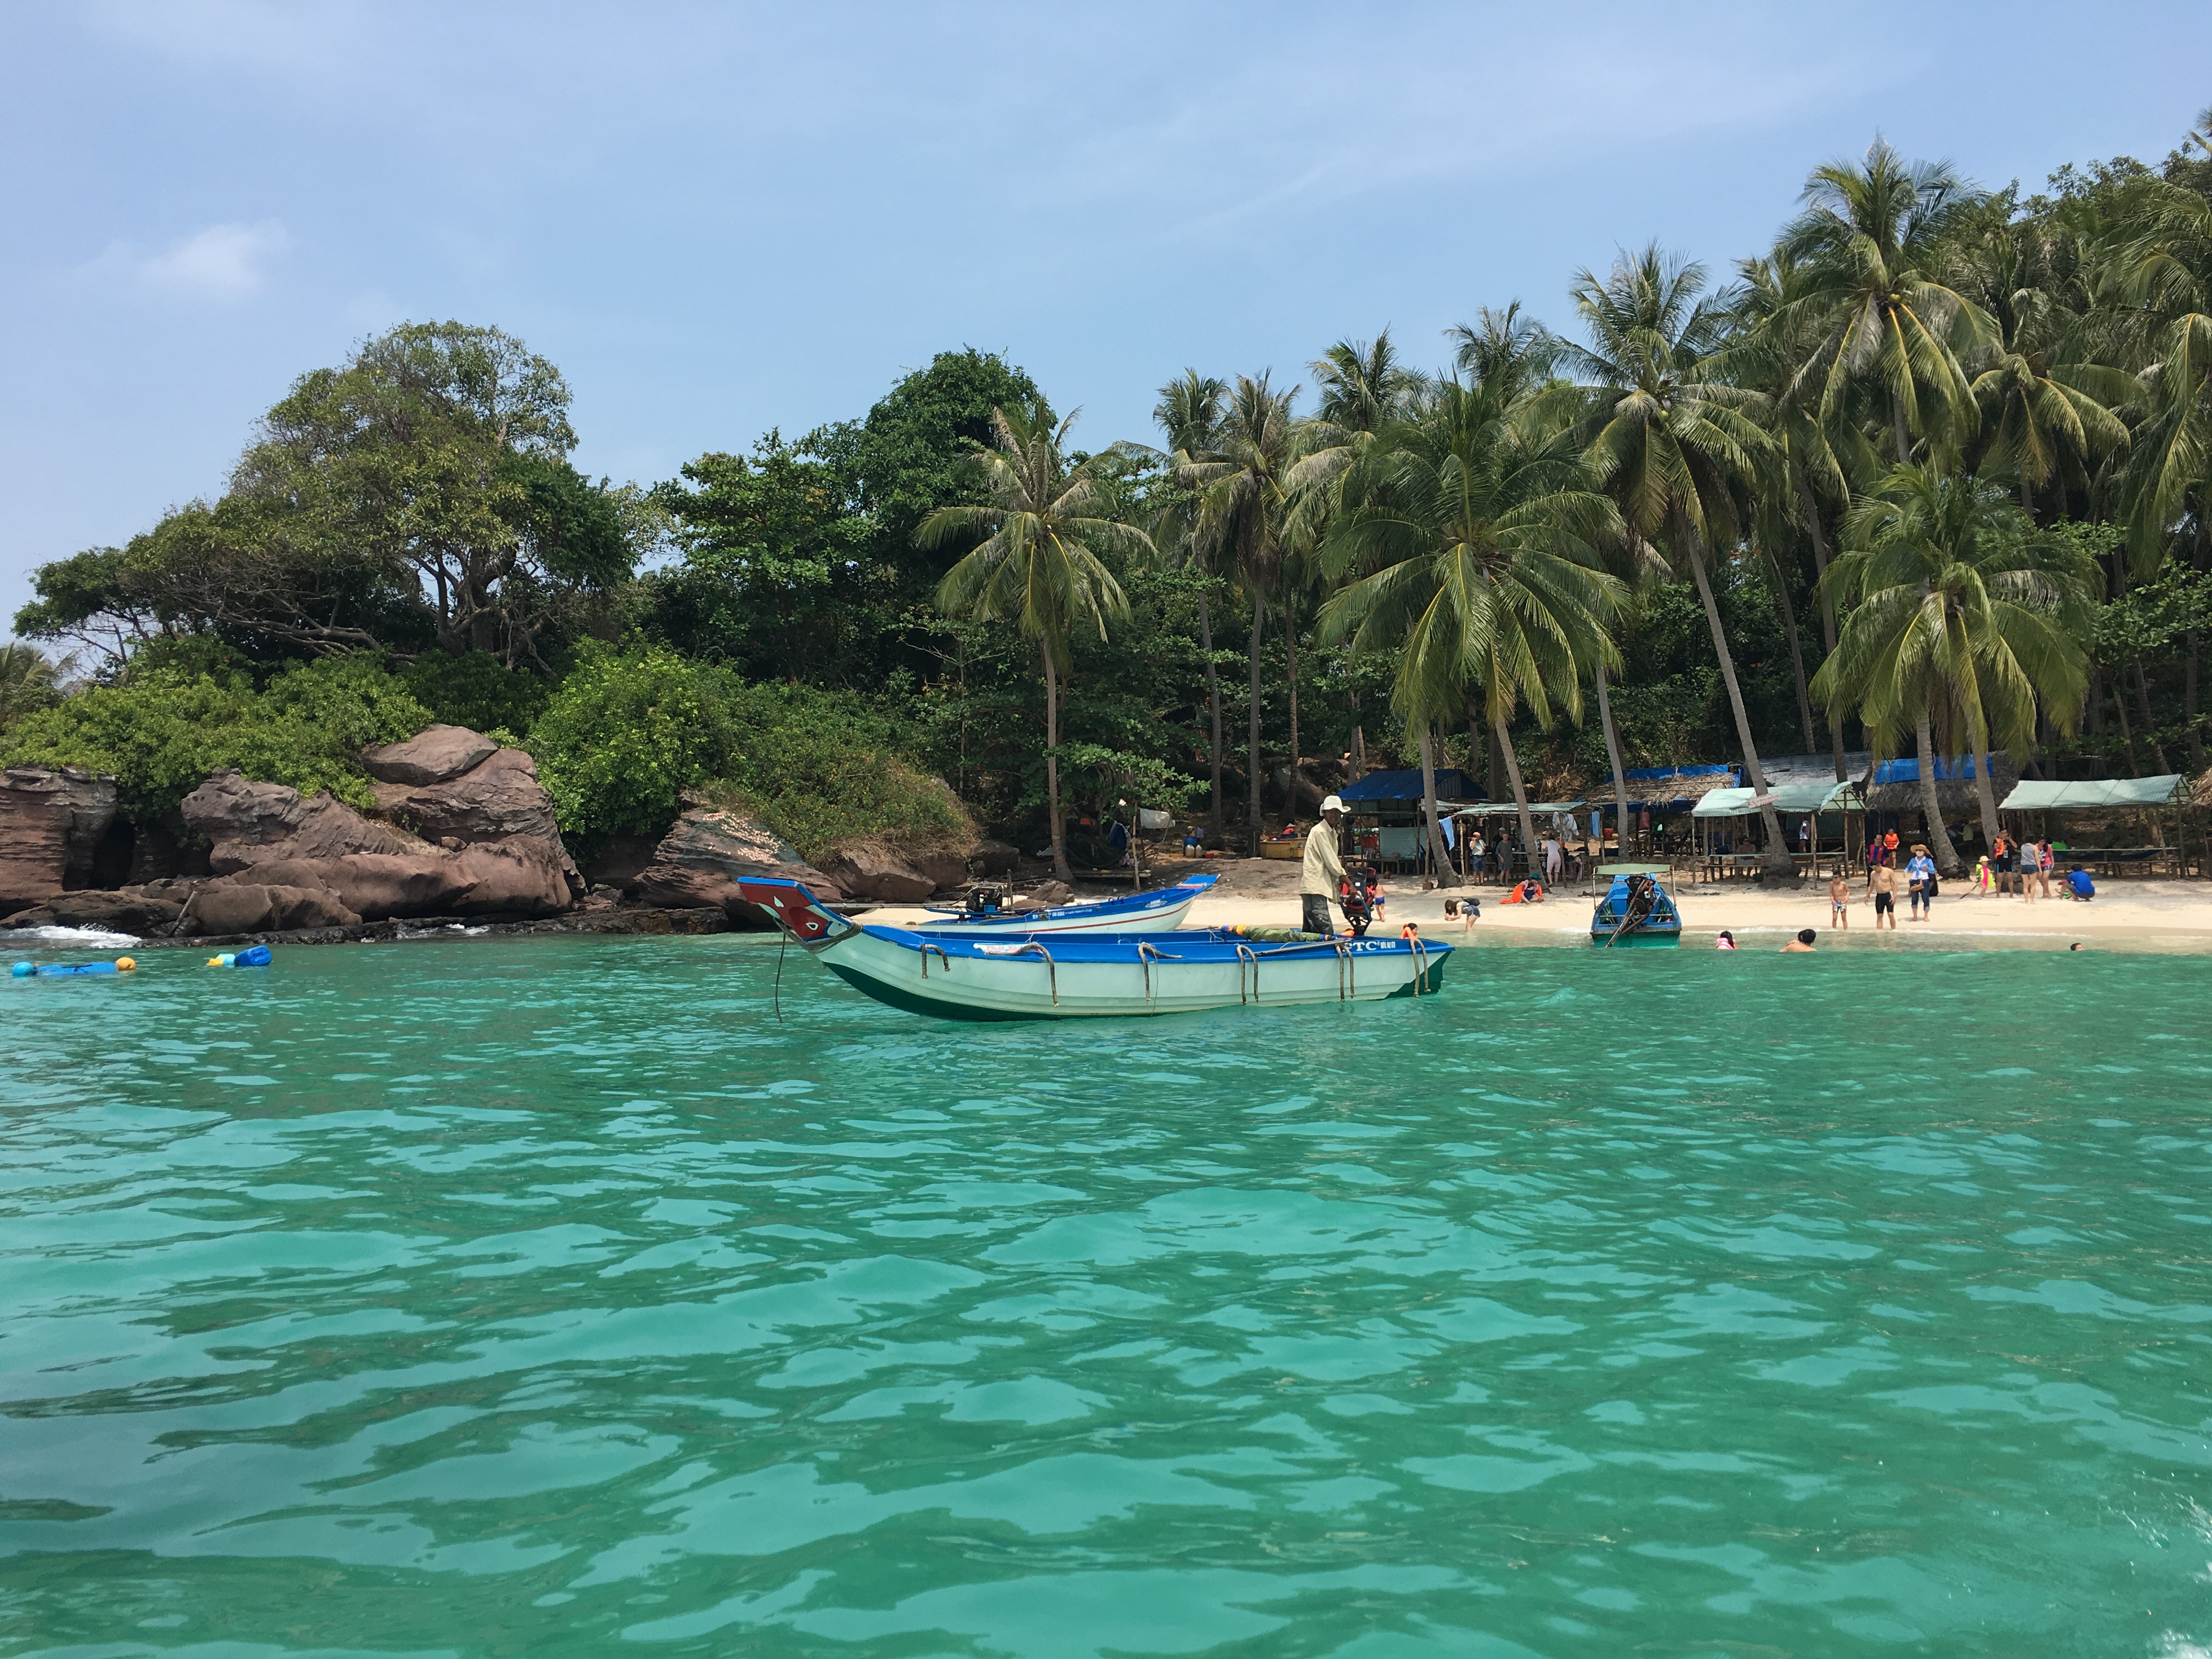 The An Thoi islands of Phu Quoc, Vietnam.